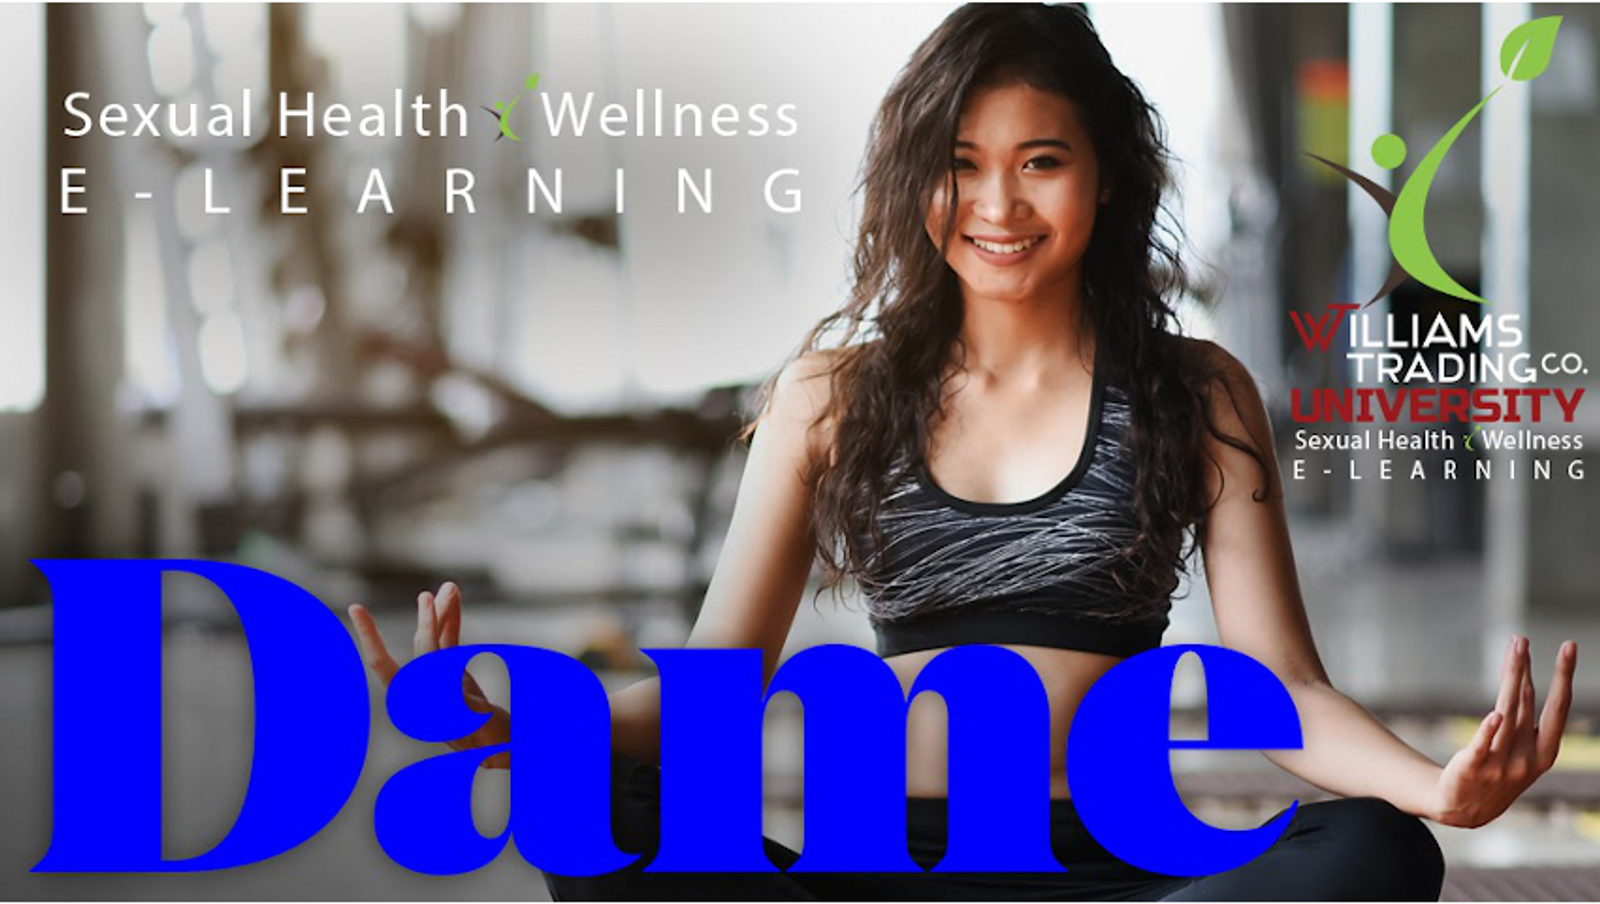 Williams Trading Univ. Launches New Health & Wellness Course